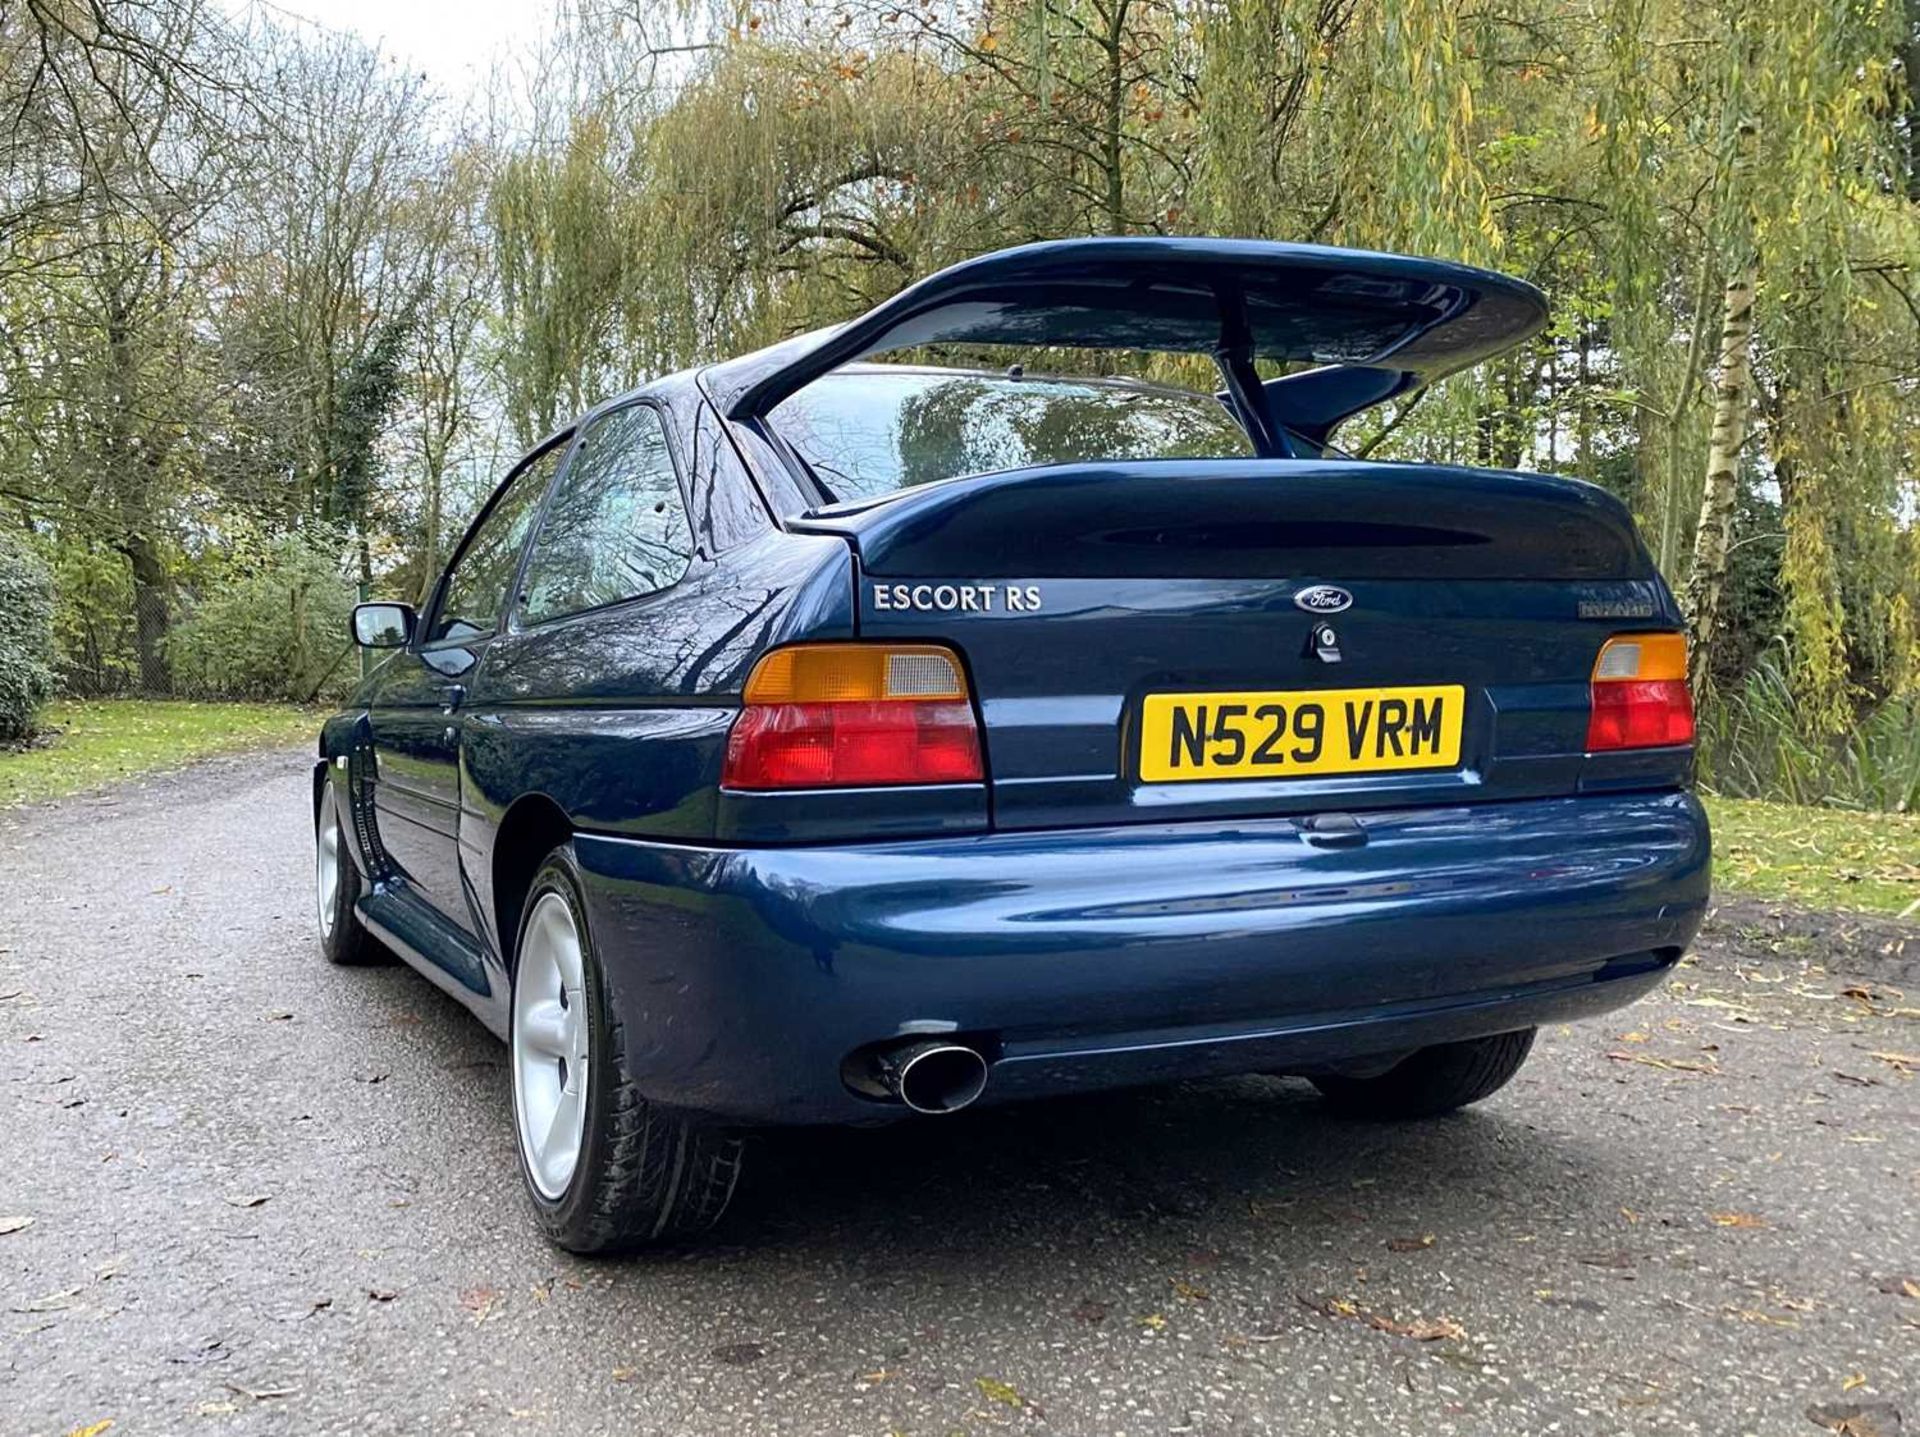 1995 Ford Escort RS Cosworth LUX Only 56,000 miles, finished in rare Petrol Blue - Image 21 of 98